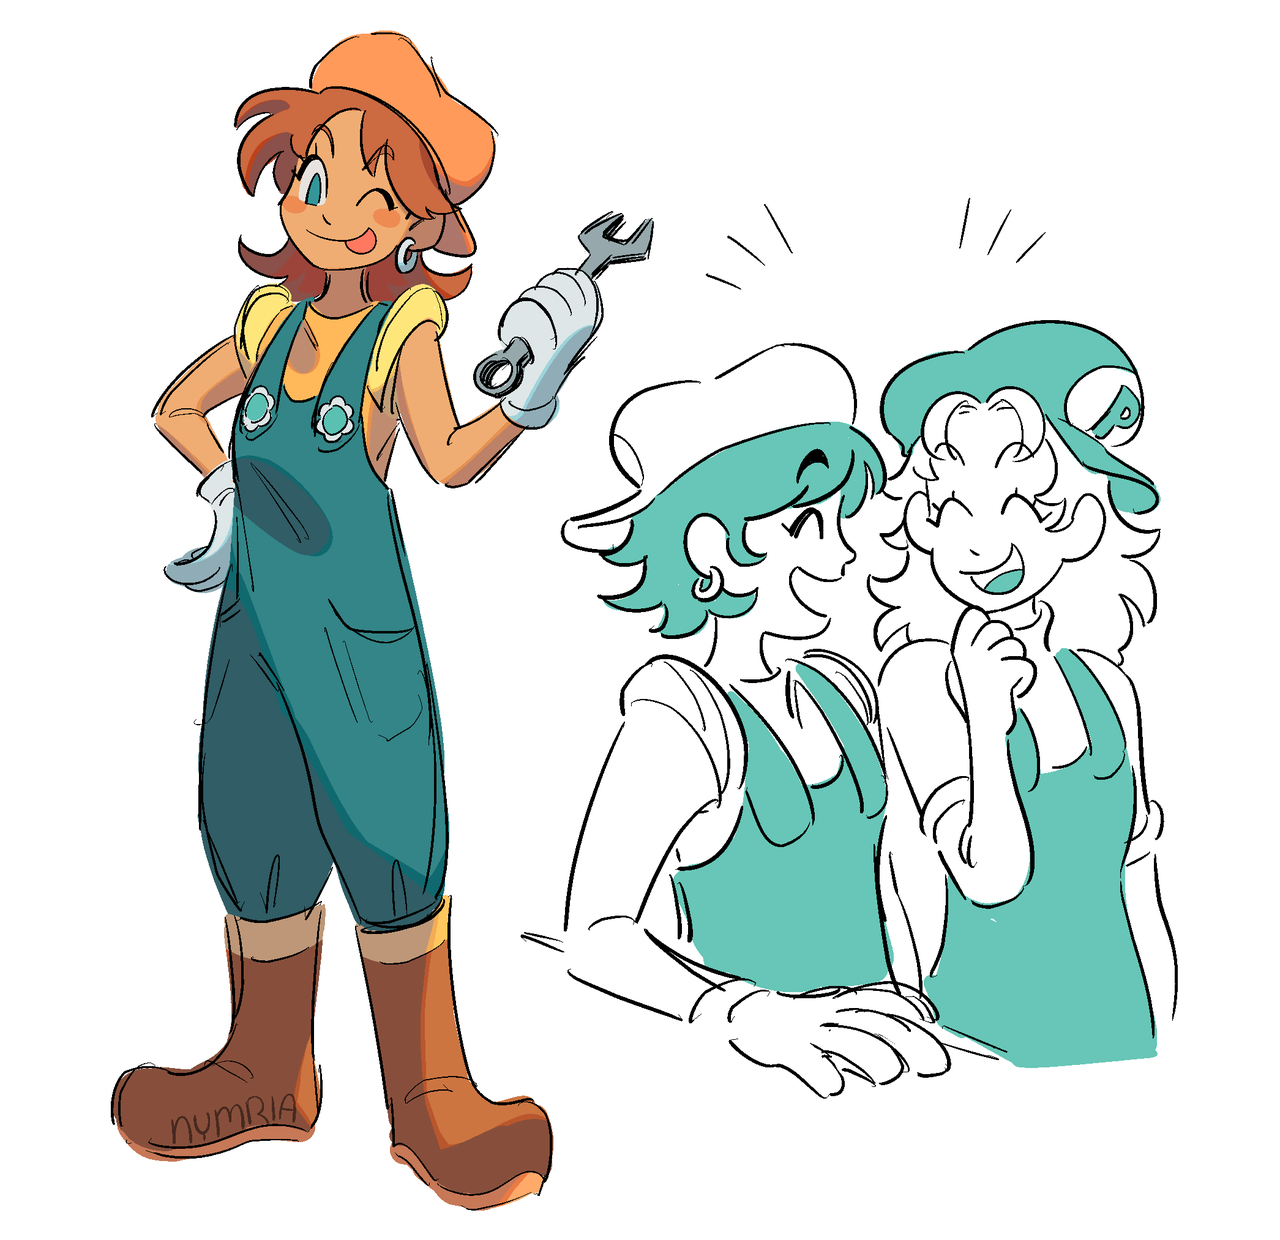 nymria:plumber peach and plumber daisy doodles based off this old official comic